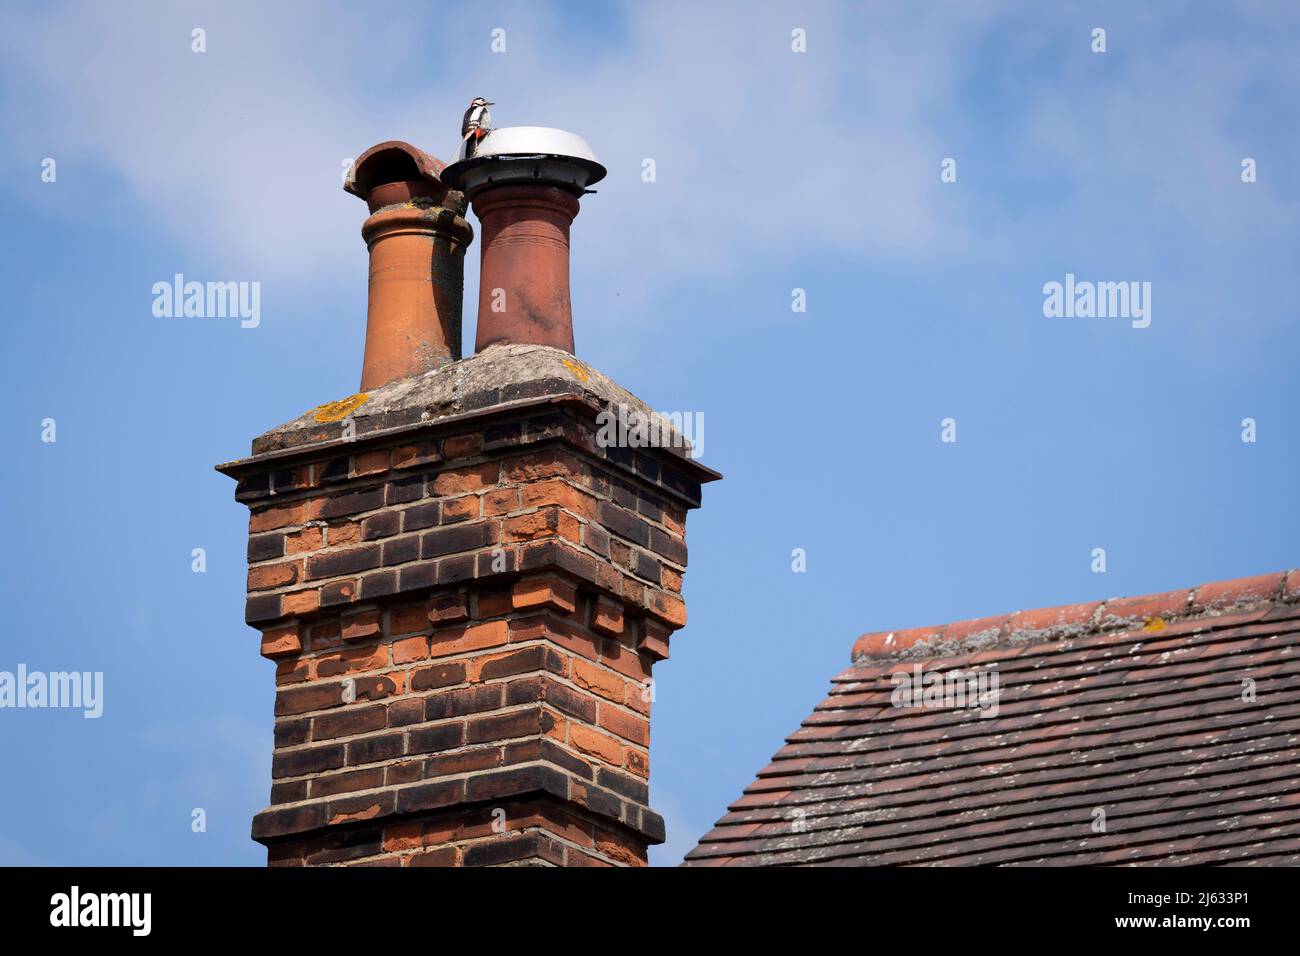 A male Greater Spotted Woodpecker stands on the top of a chimney pot where, affectionately heard by residents around this south London suburban neighbourhood, it announces its presence to others every day by drumming on the metal chimney covering, on 25th April 2022, in south London, England. The Great Spotted Woodpecker is a member of the woodpecker family Picidae. Instead of singing to declare their territory, woodpeckers drum to advertise their presence to others. They usually require wood with particular resonant qualities for this purpose but this bird has been ptapping on local aerials a Stock Photo